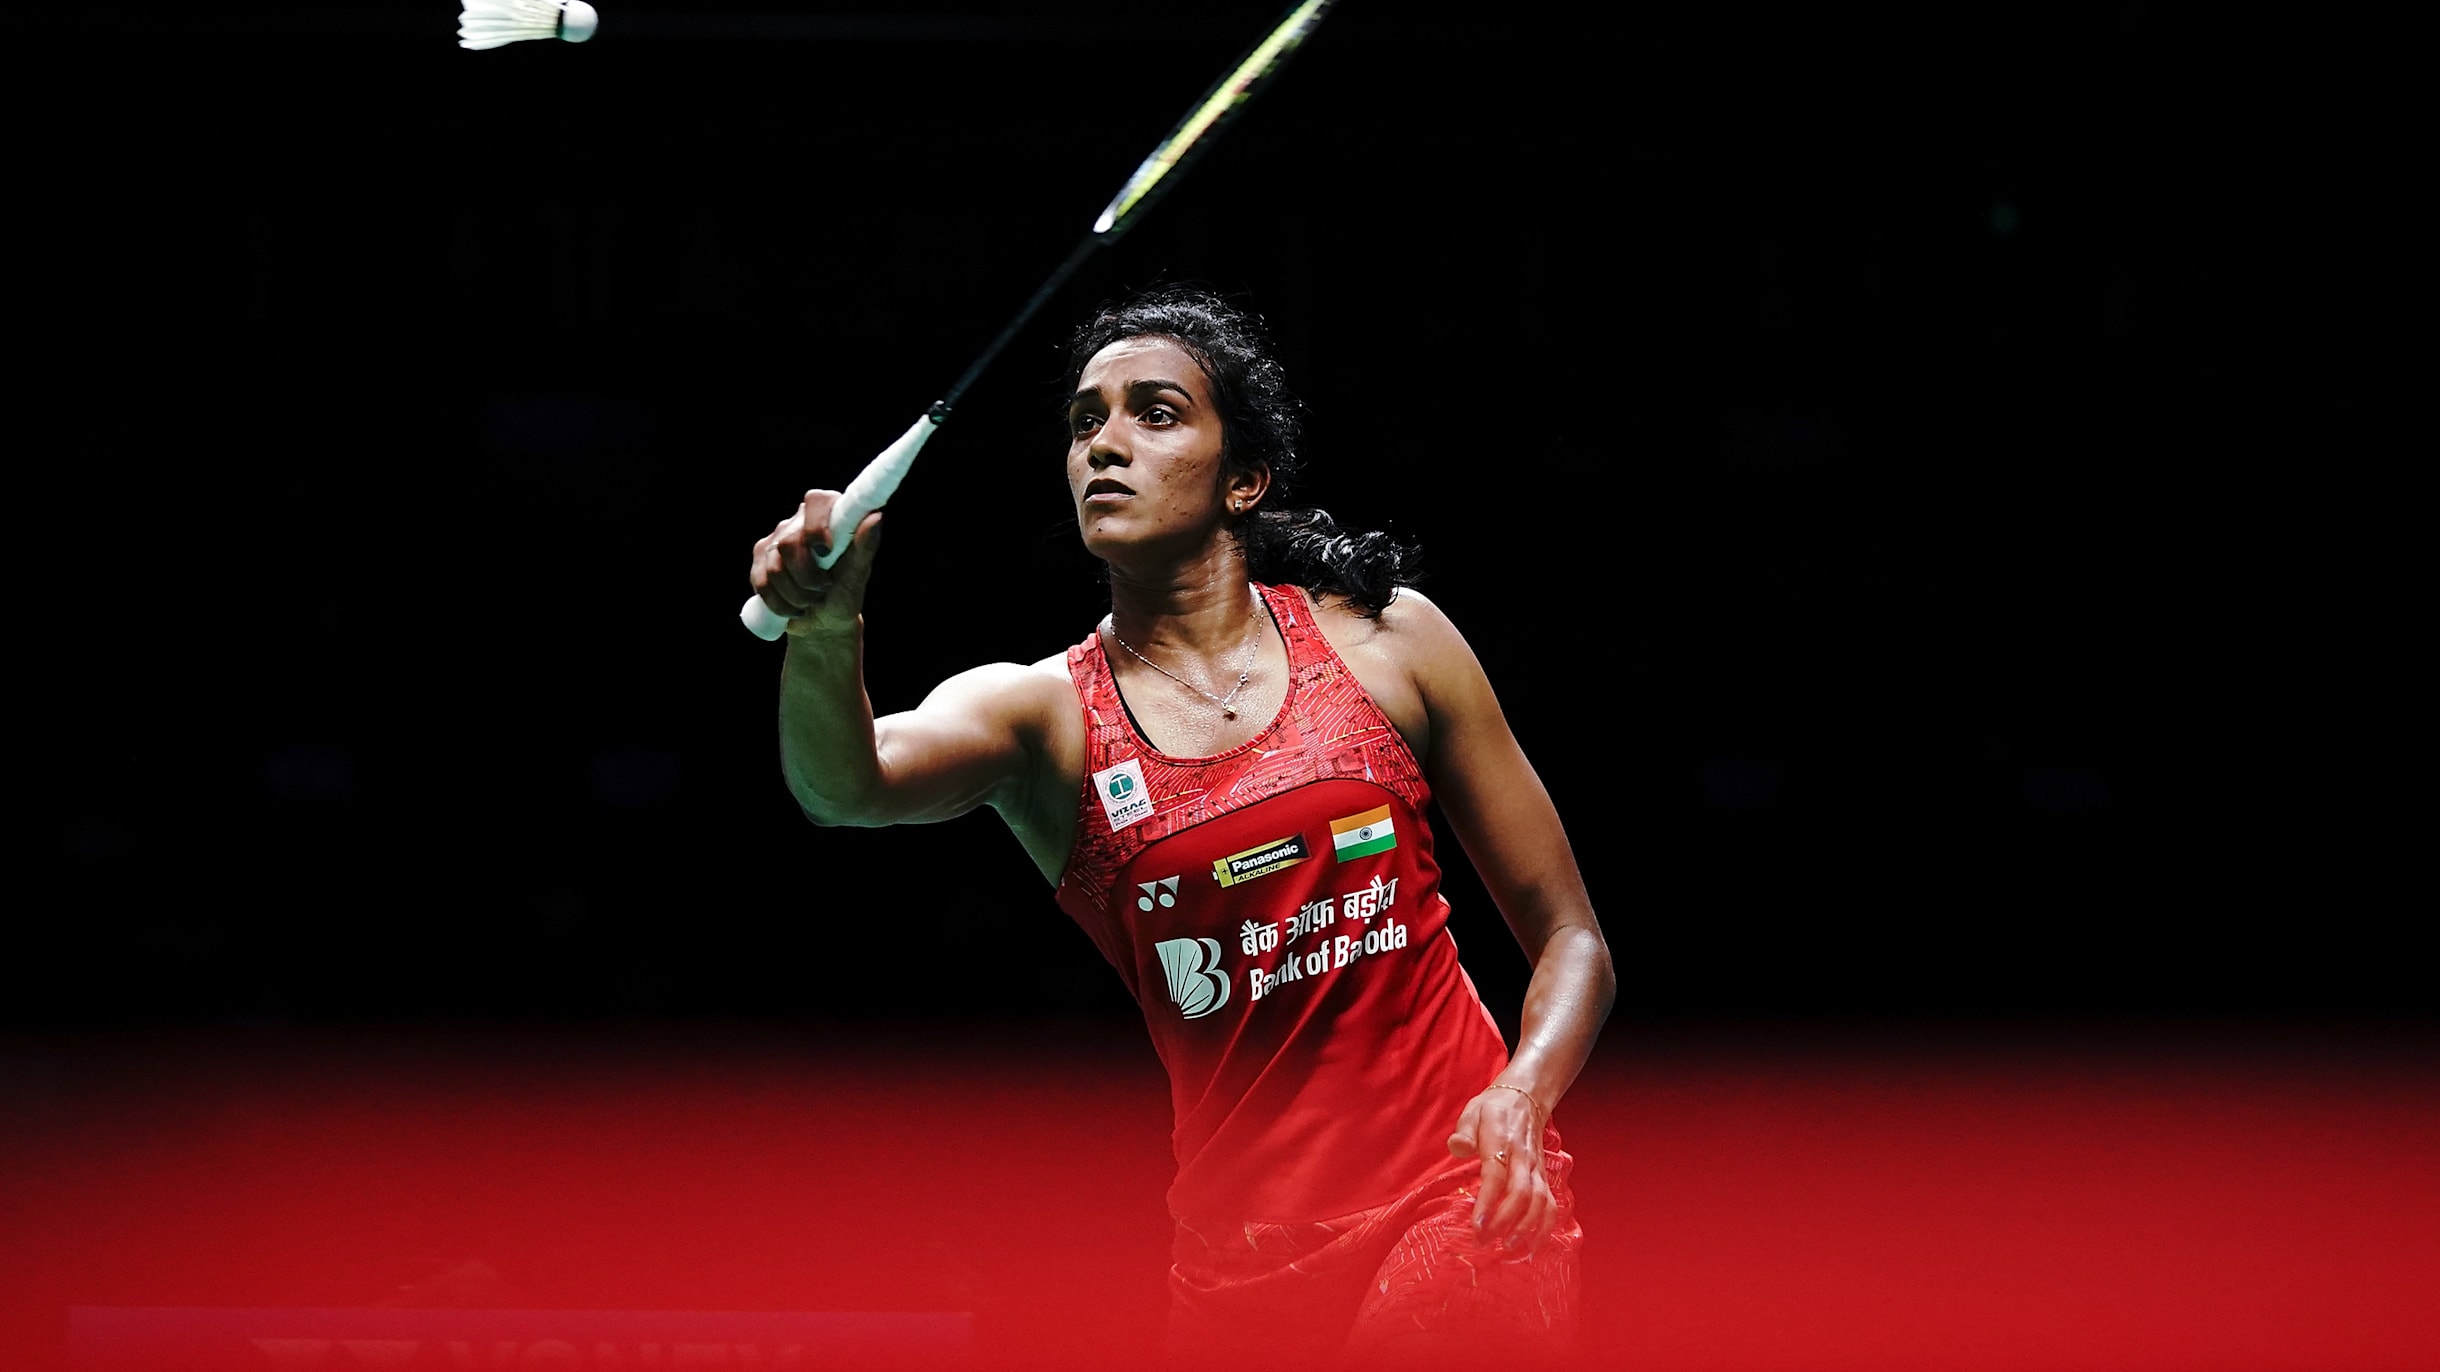 India in badminton world championships Meet the medal winners